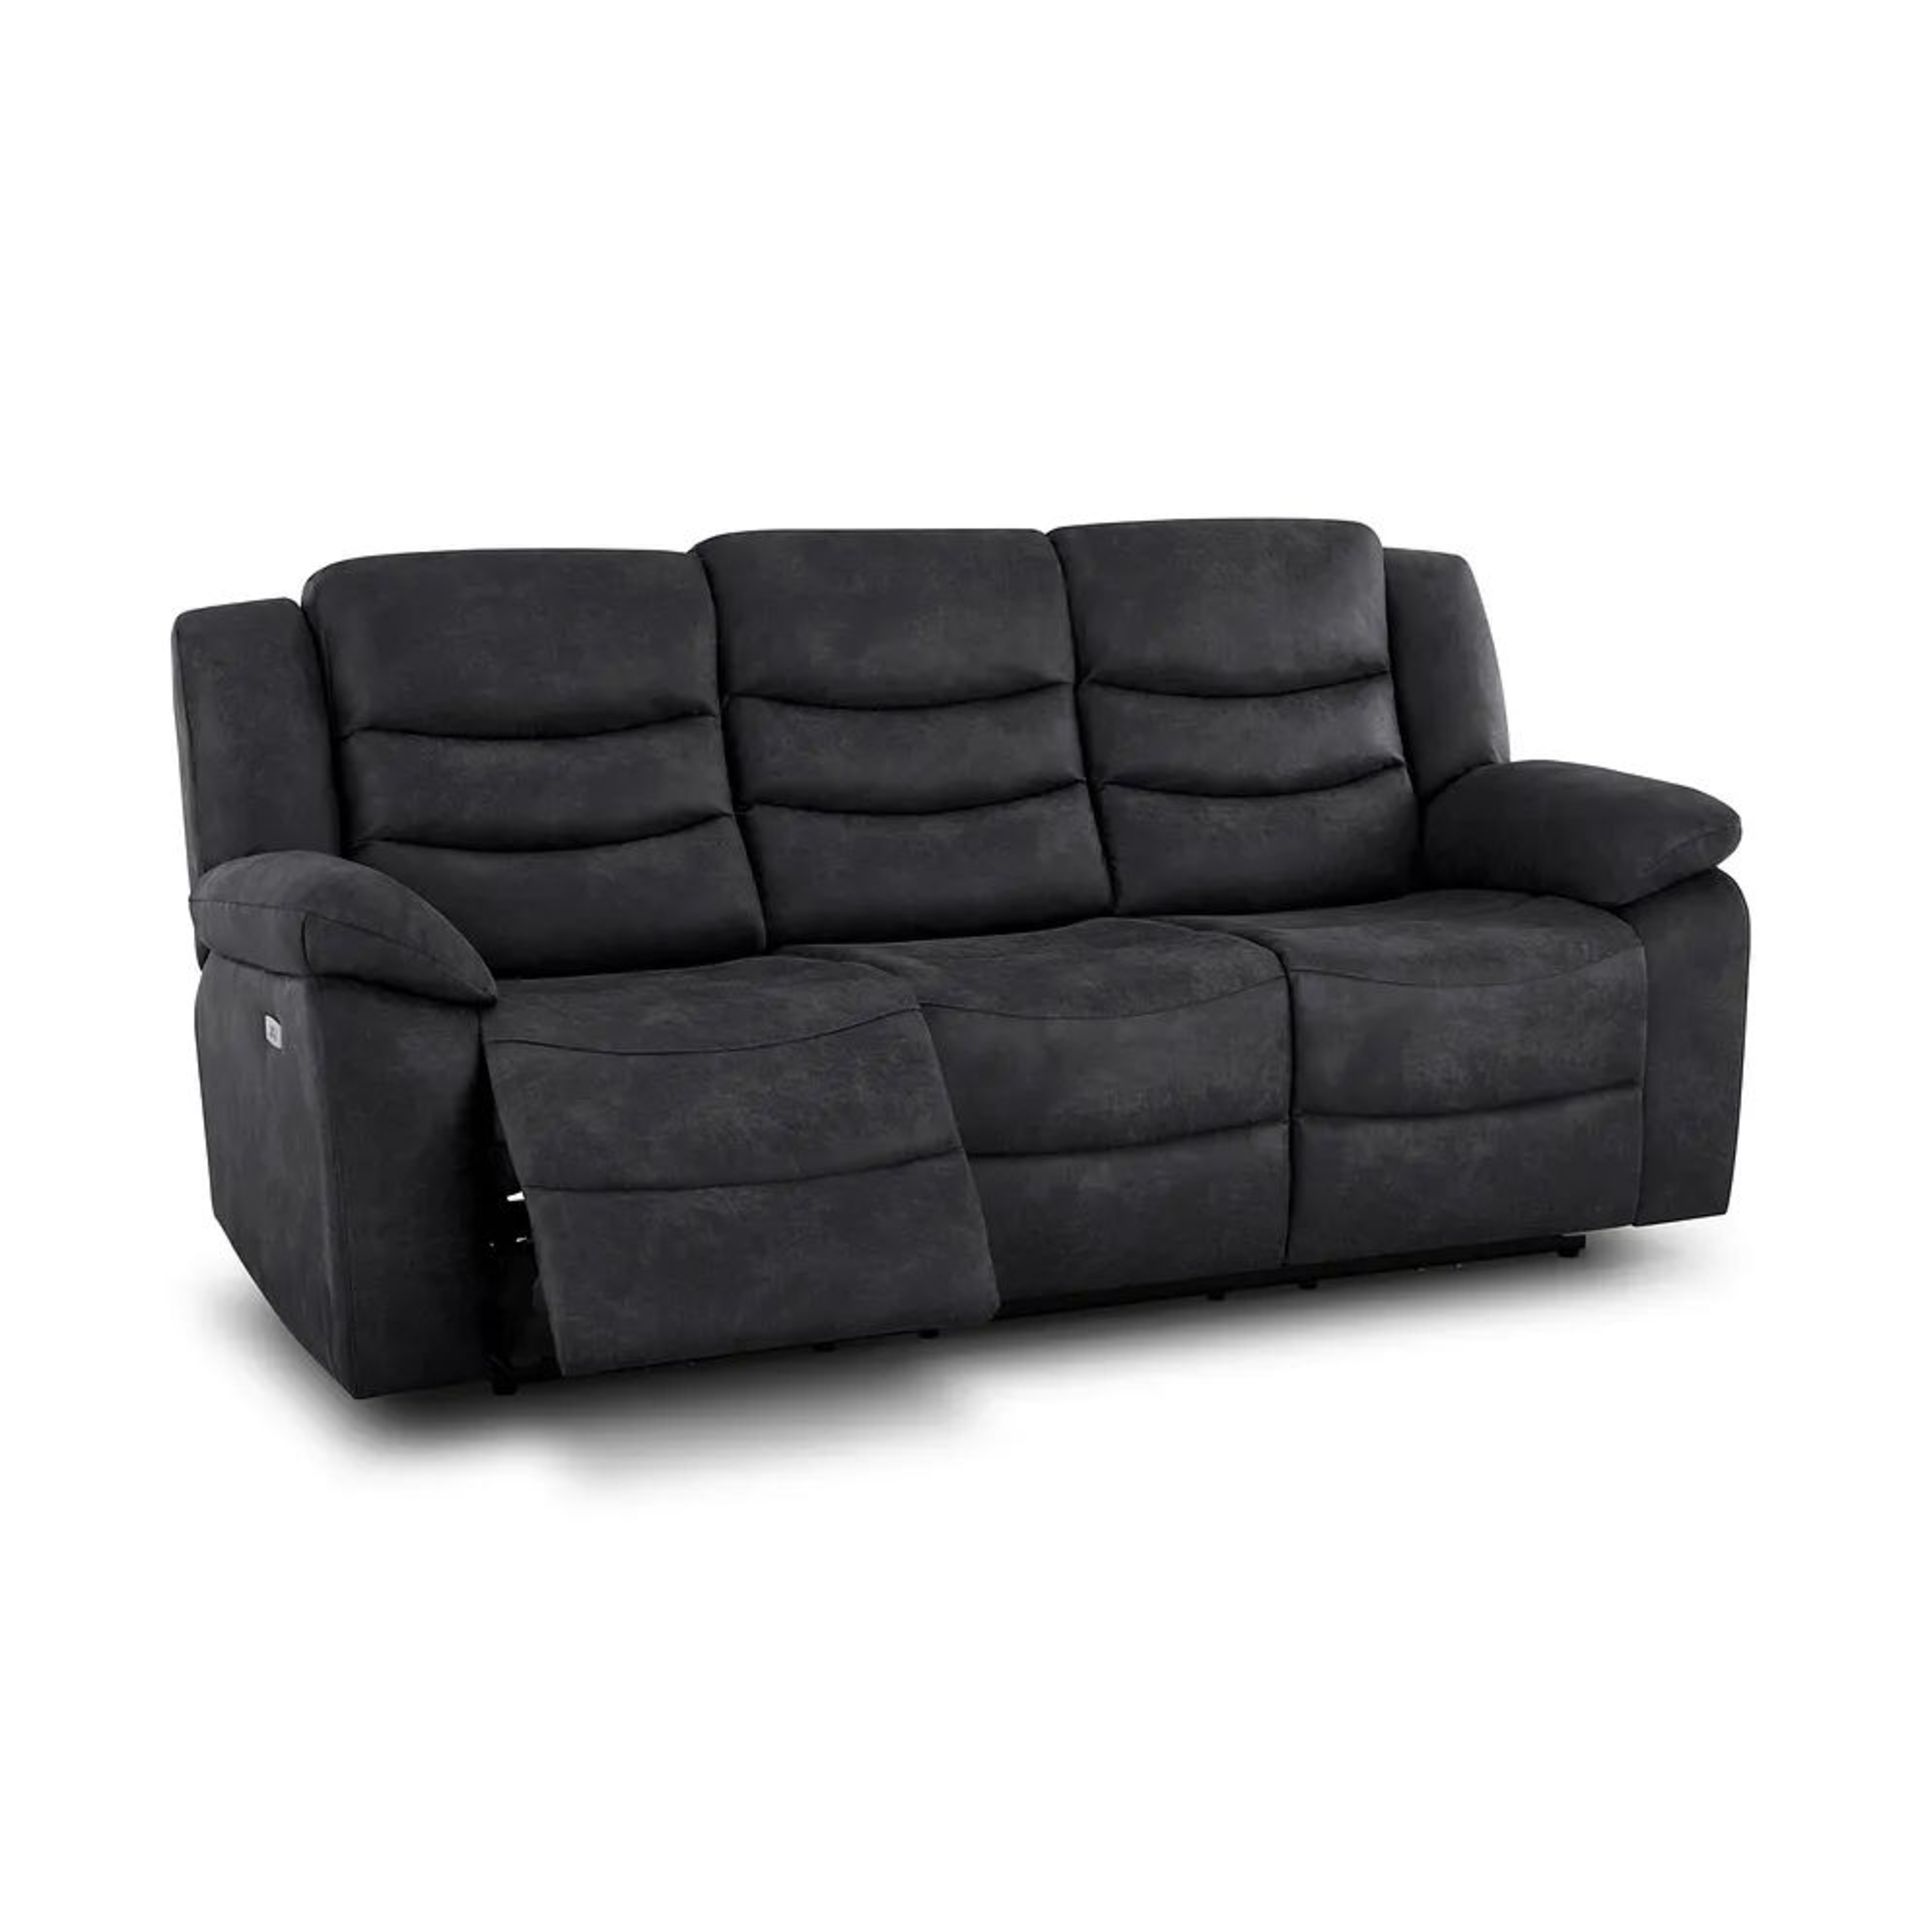 BRAND NEW MARLOW 3 Seater Electric Recliner Sofa - MILLER GREY FABRIC. RRP £1199. Designed to suit - Bild 3 aus 12